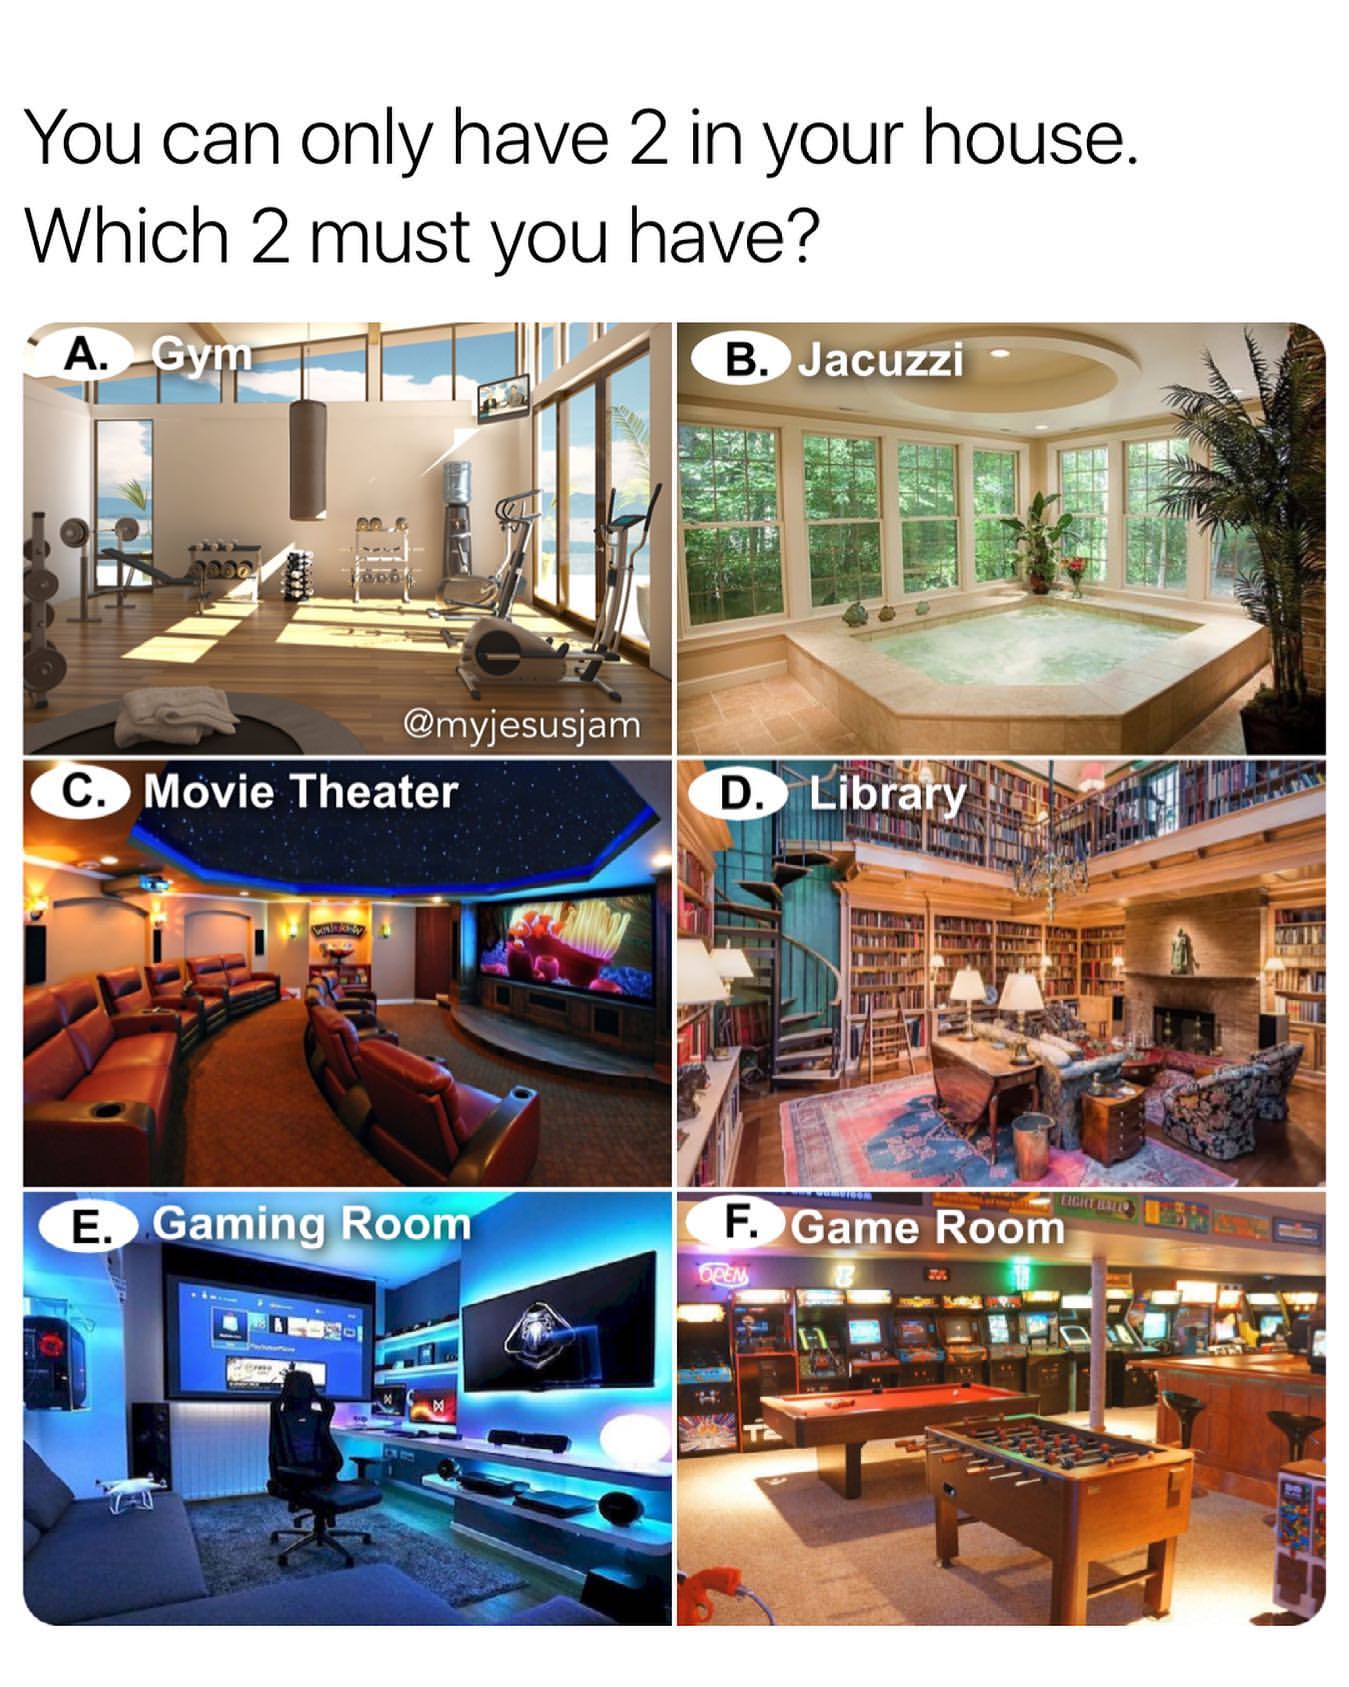 You can only have 2 in your house. Which 2 must you have?  A. Gym. B. Jacuzzi. C. Movie Theater. D. Library. E. Gaming Room. F. Game Room.